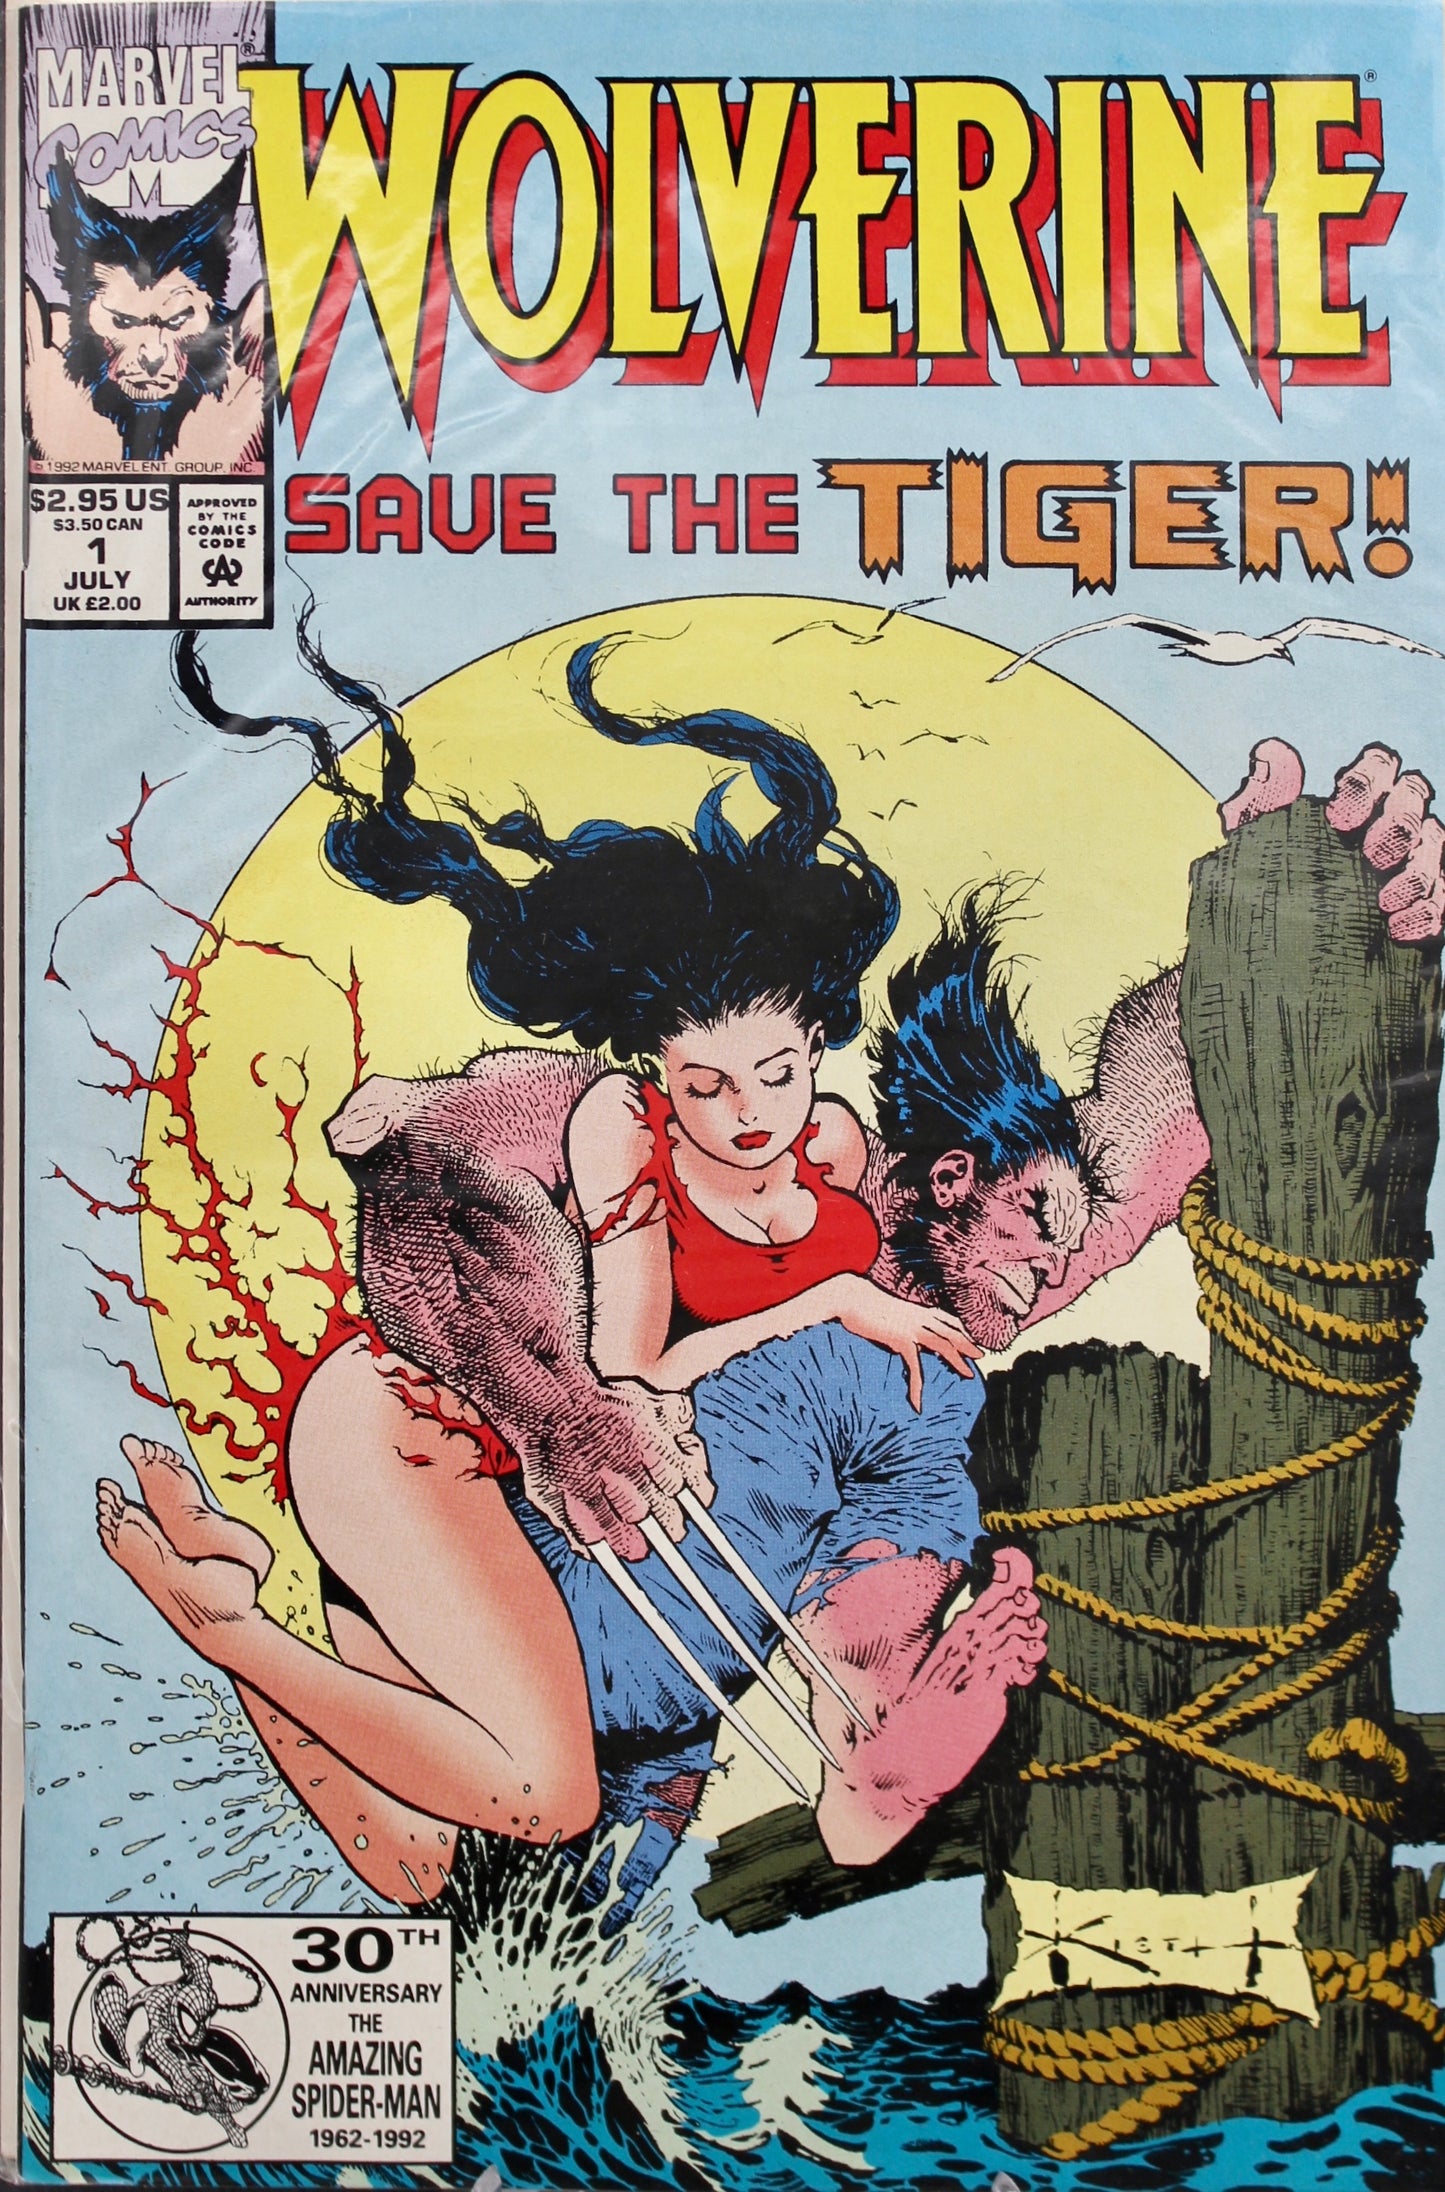 Wolverine Save the Tiger #1